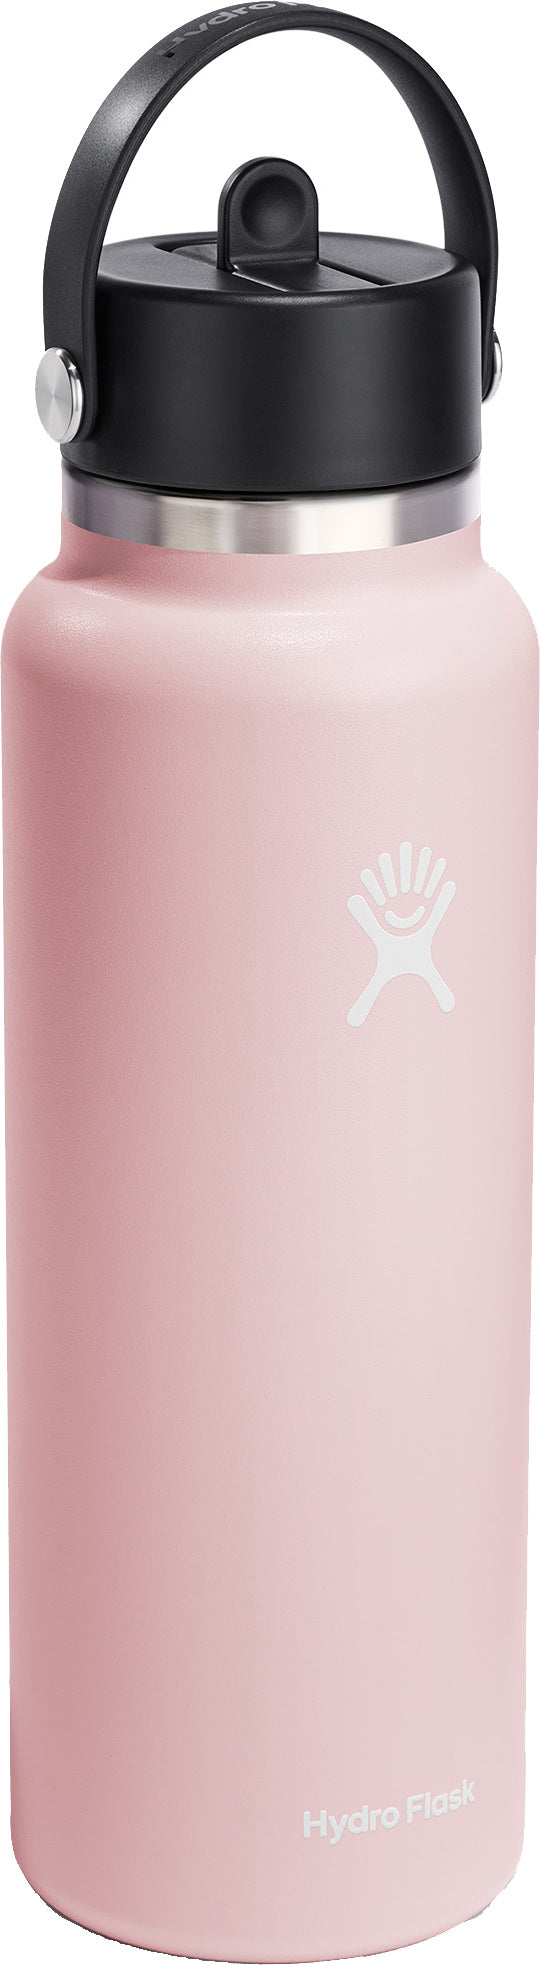 Hydro Flask Wide Mouth Water Bottle with Flex Straw Cap, 24 oz